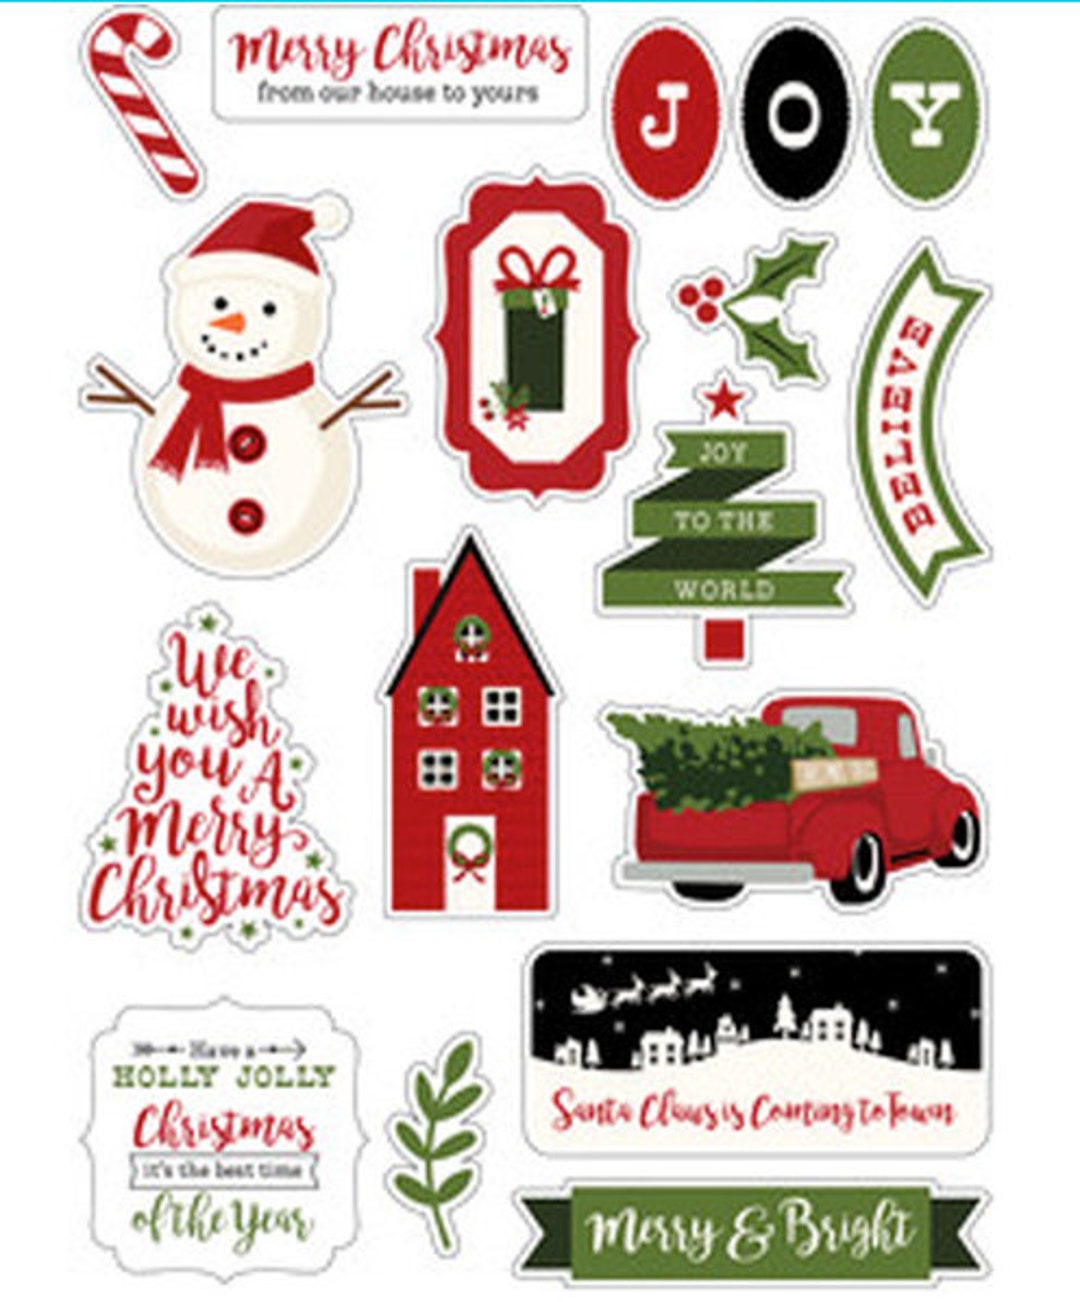 Christmas Card Stickers - Assortment of Cool Winter Holiday, Santa, Snow, Ornaments, Snowman, Snowflakes, Holly, Tree, for Kids and Adults - Over